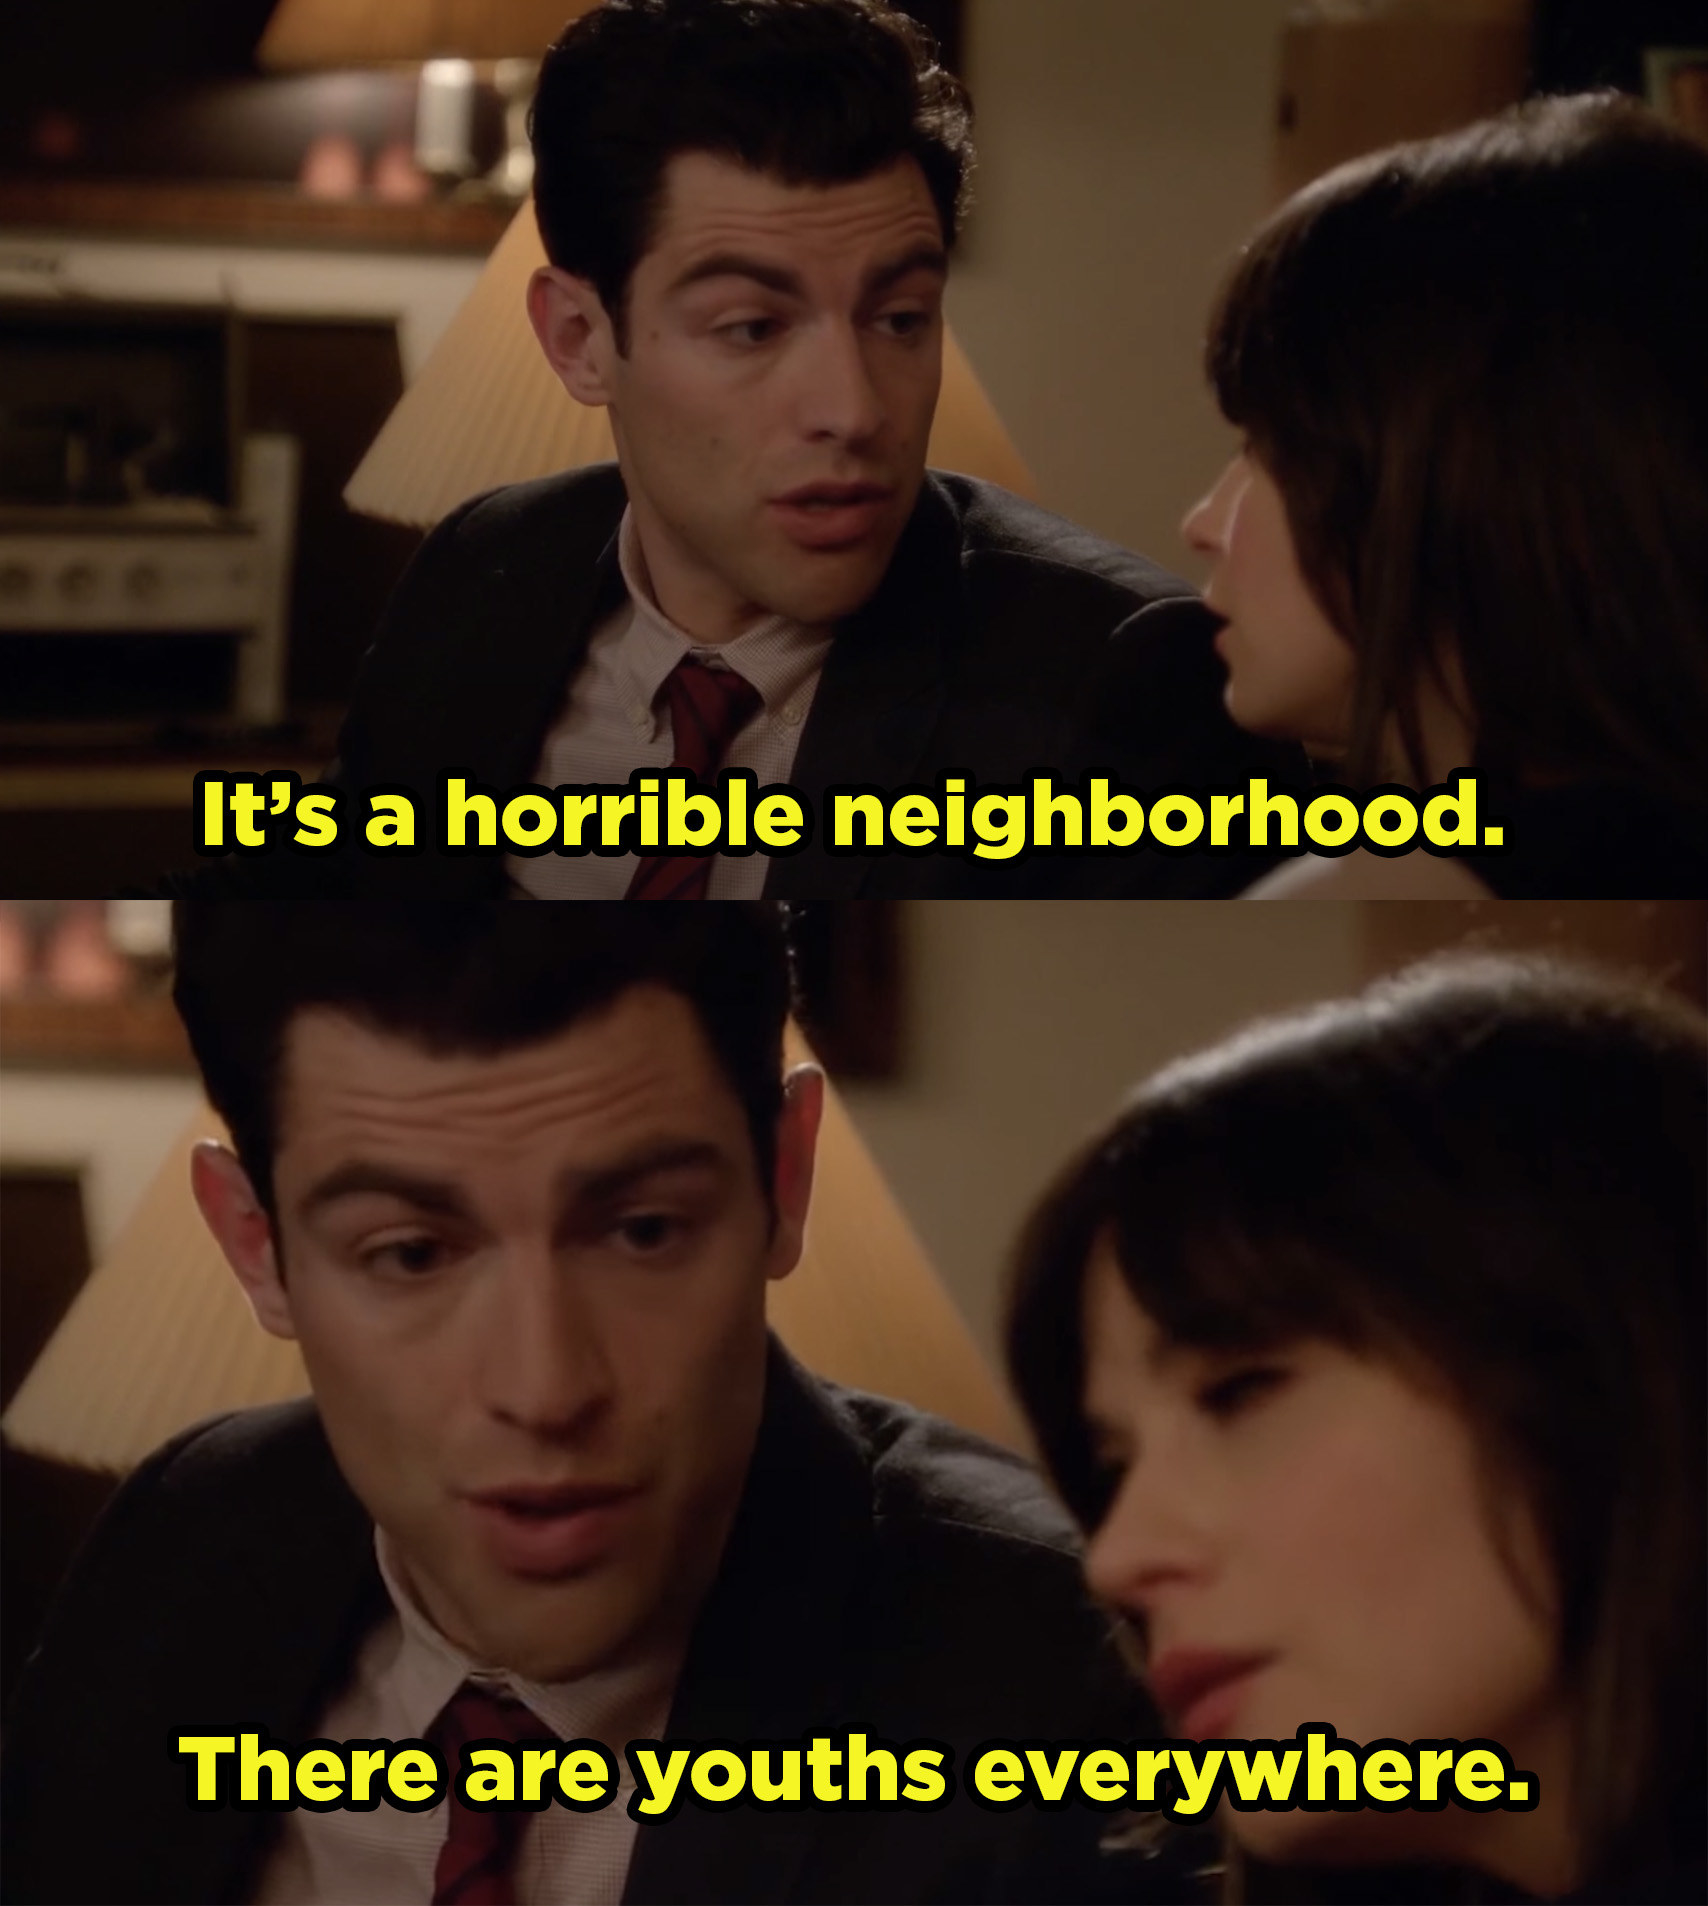 Schmidt complaining about the neighborhood youths. 